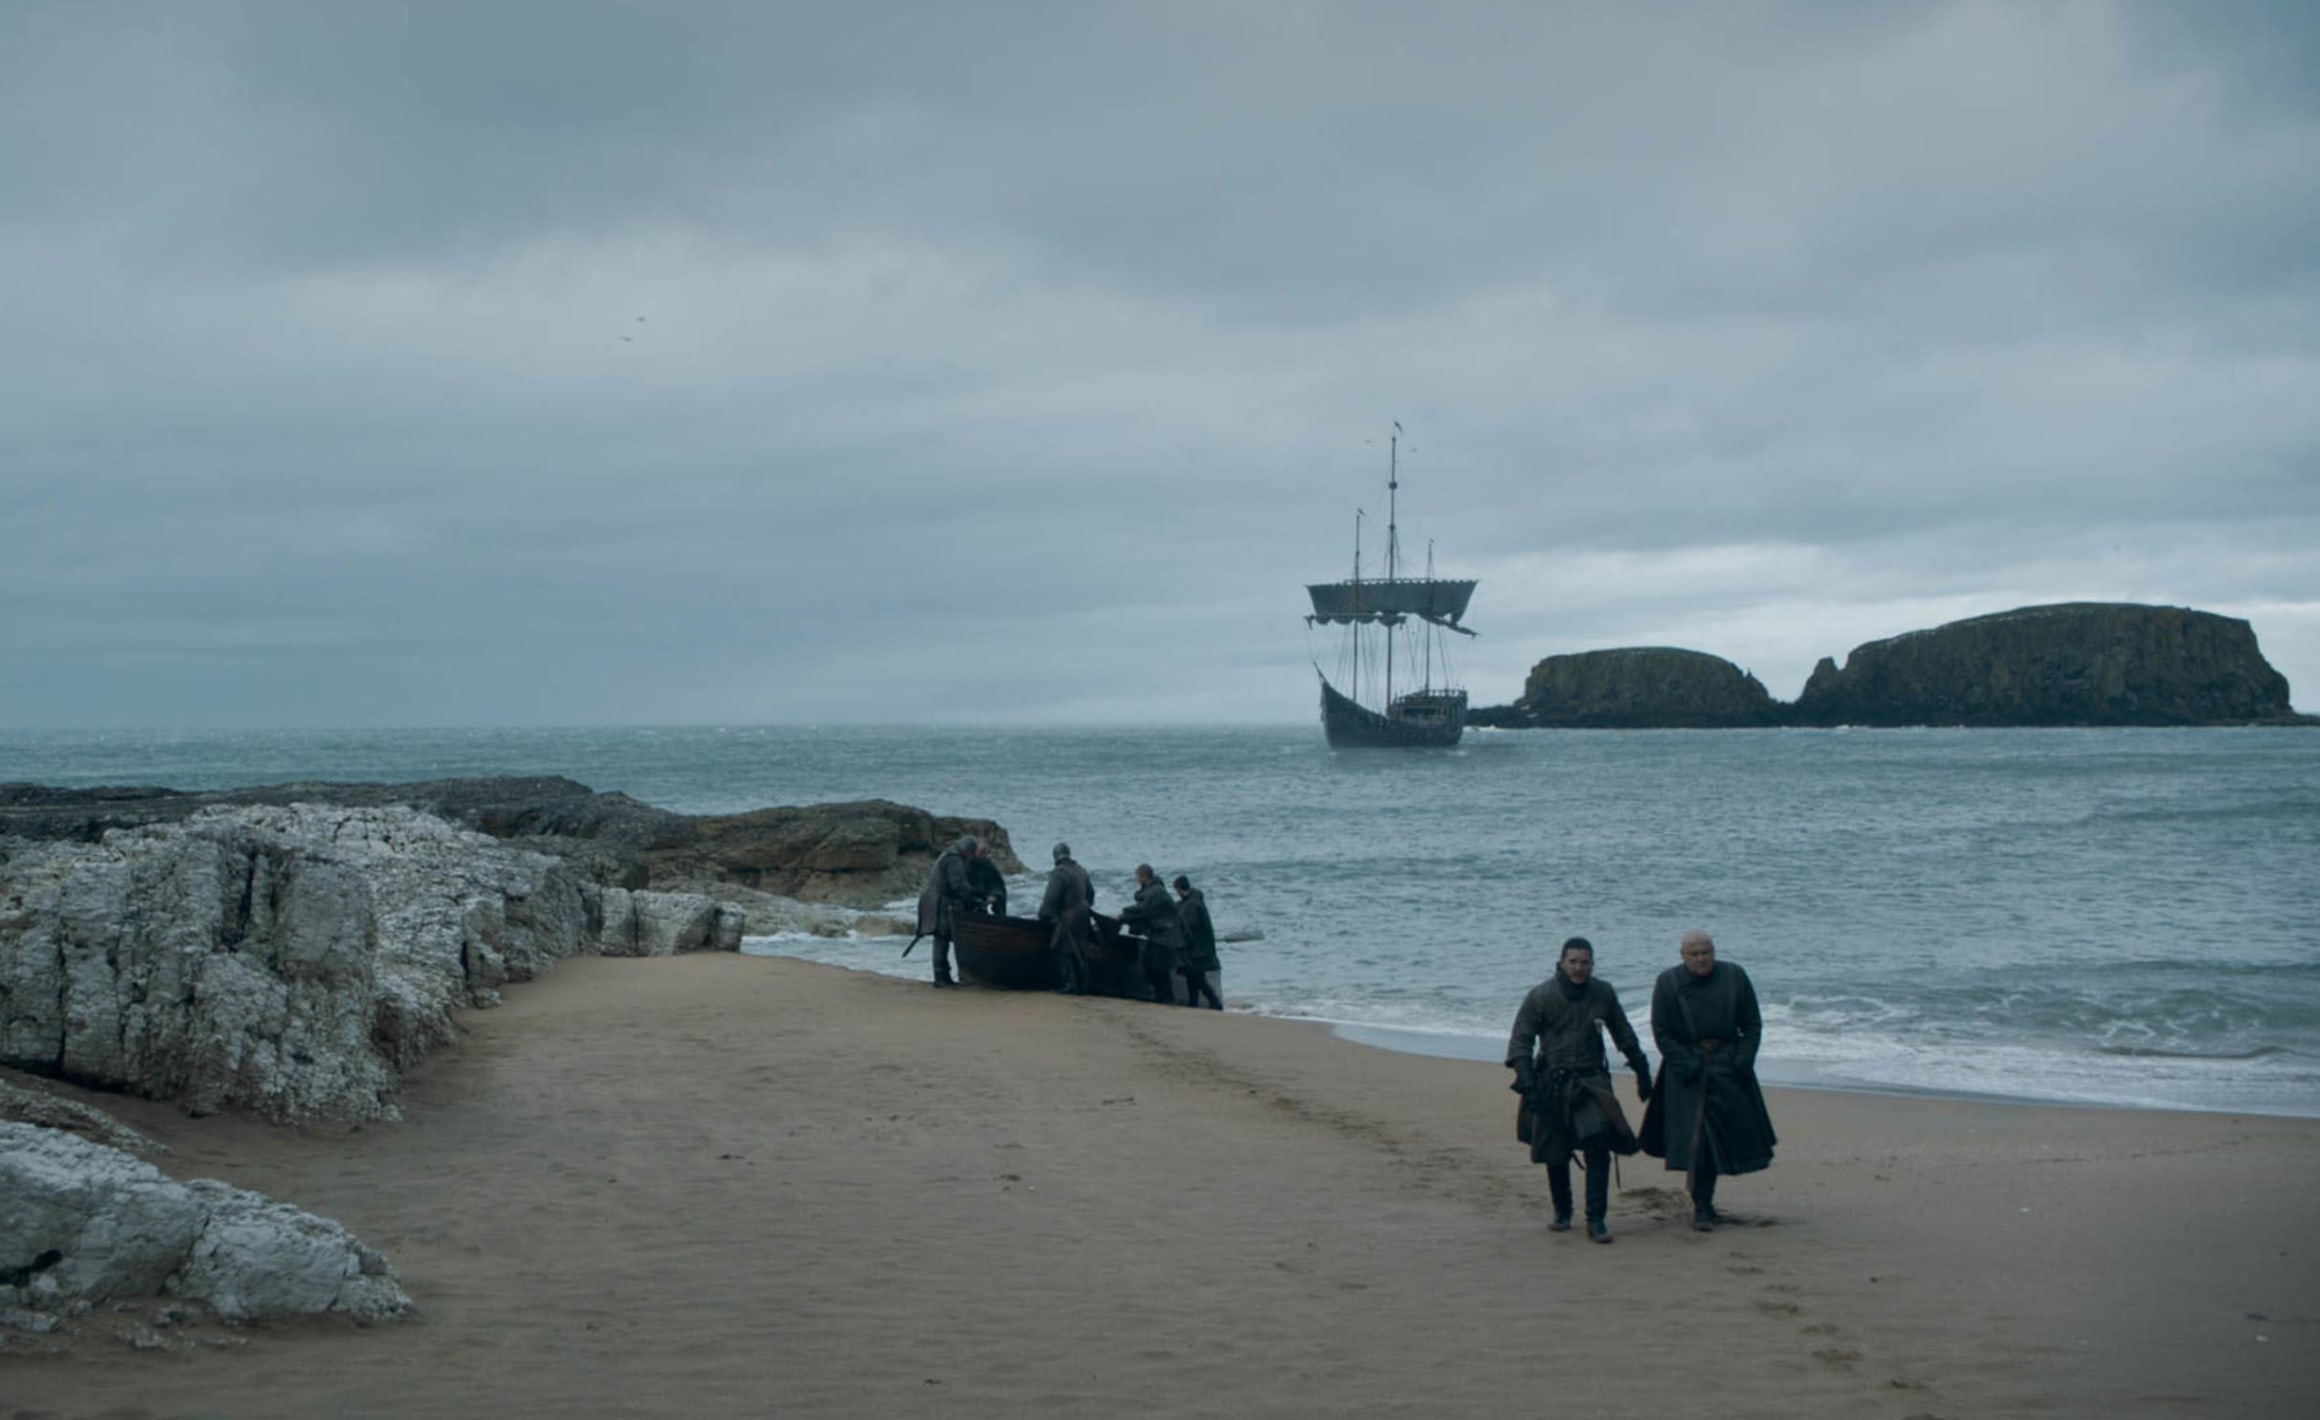 The Dragonstone Beach  Game of Thrones Series